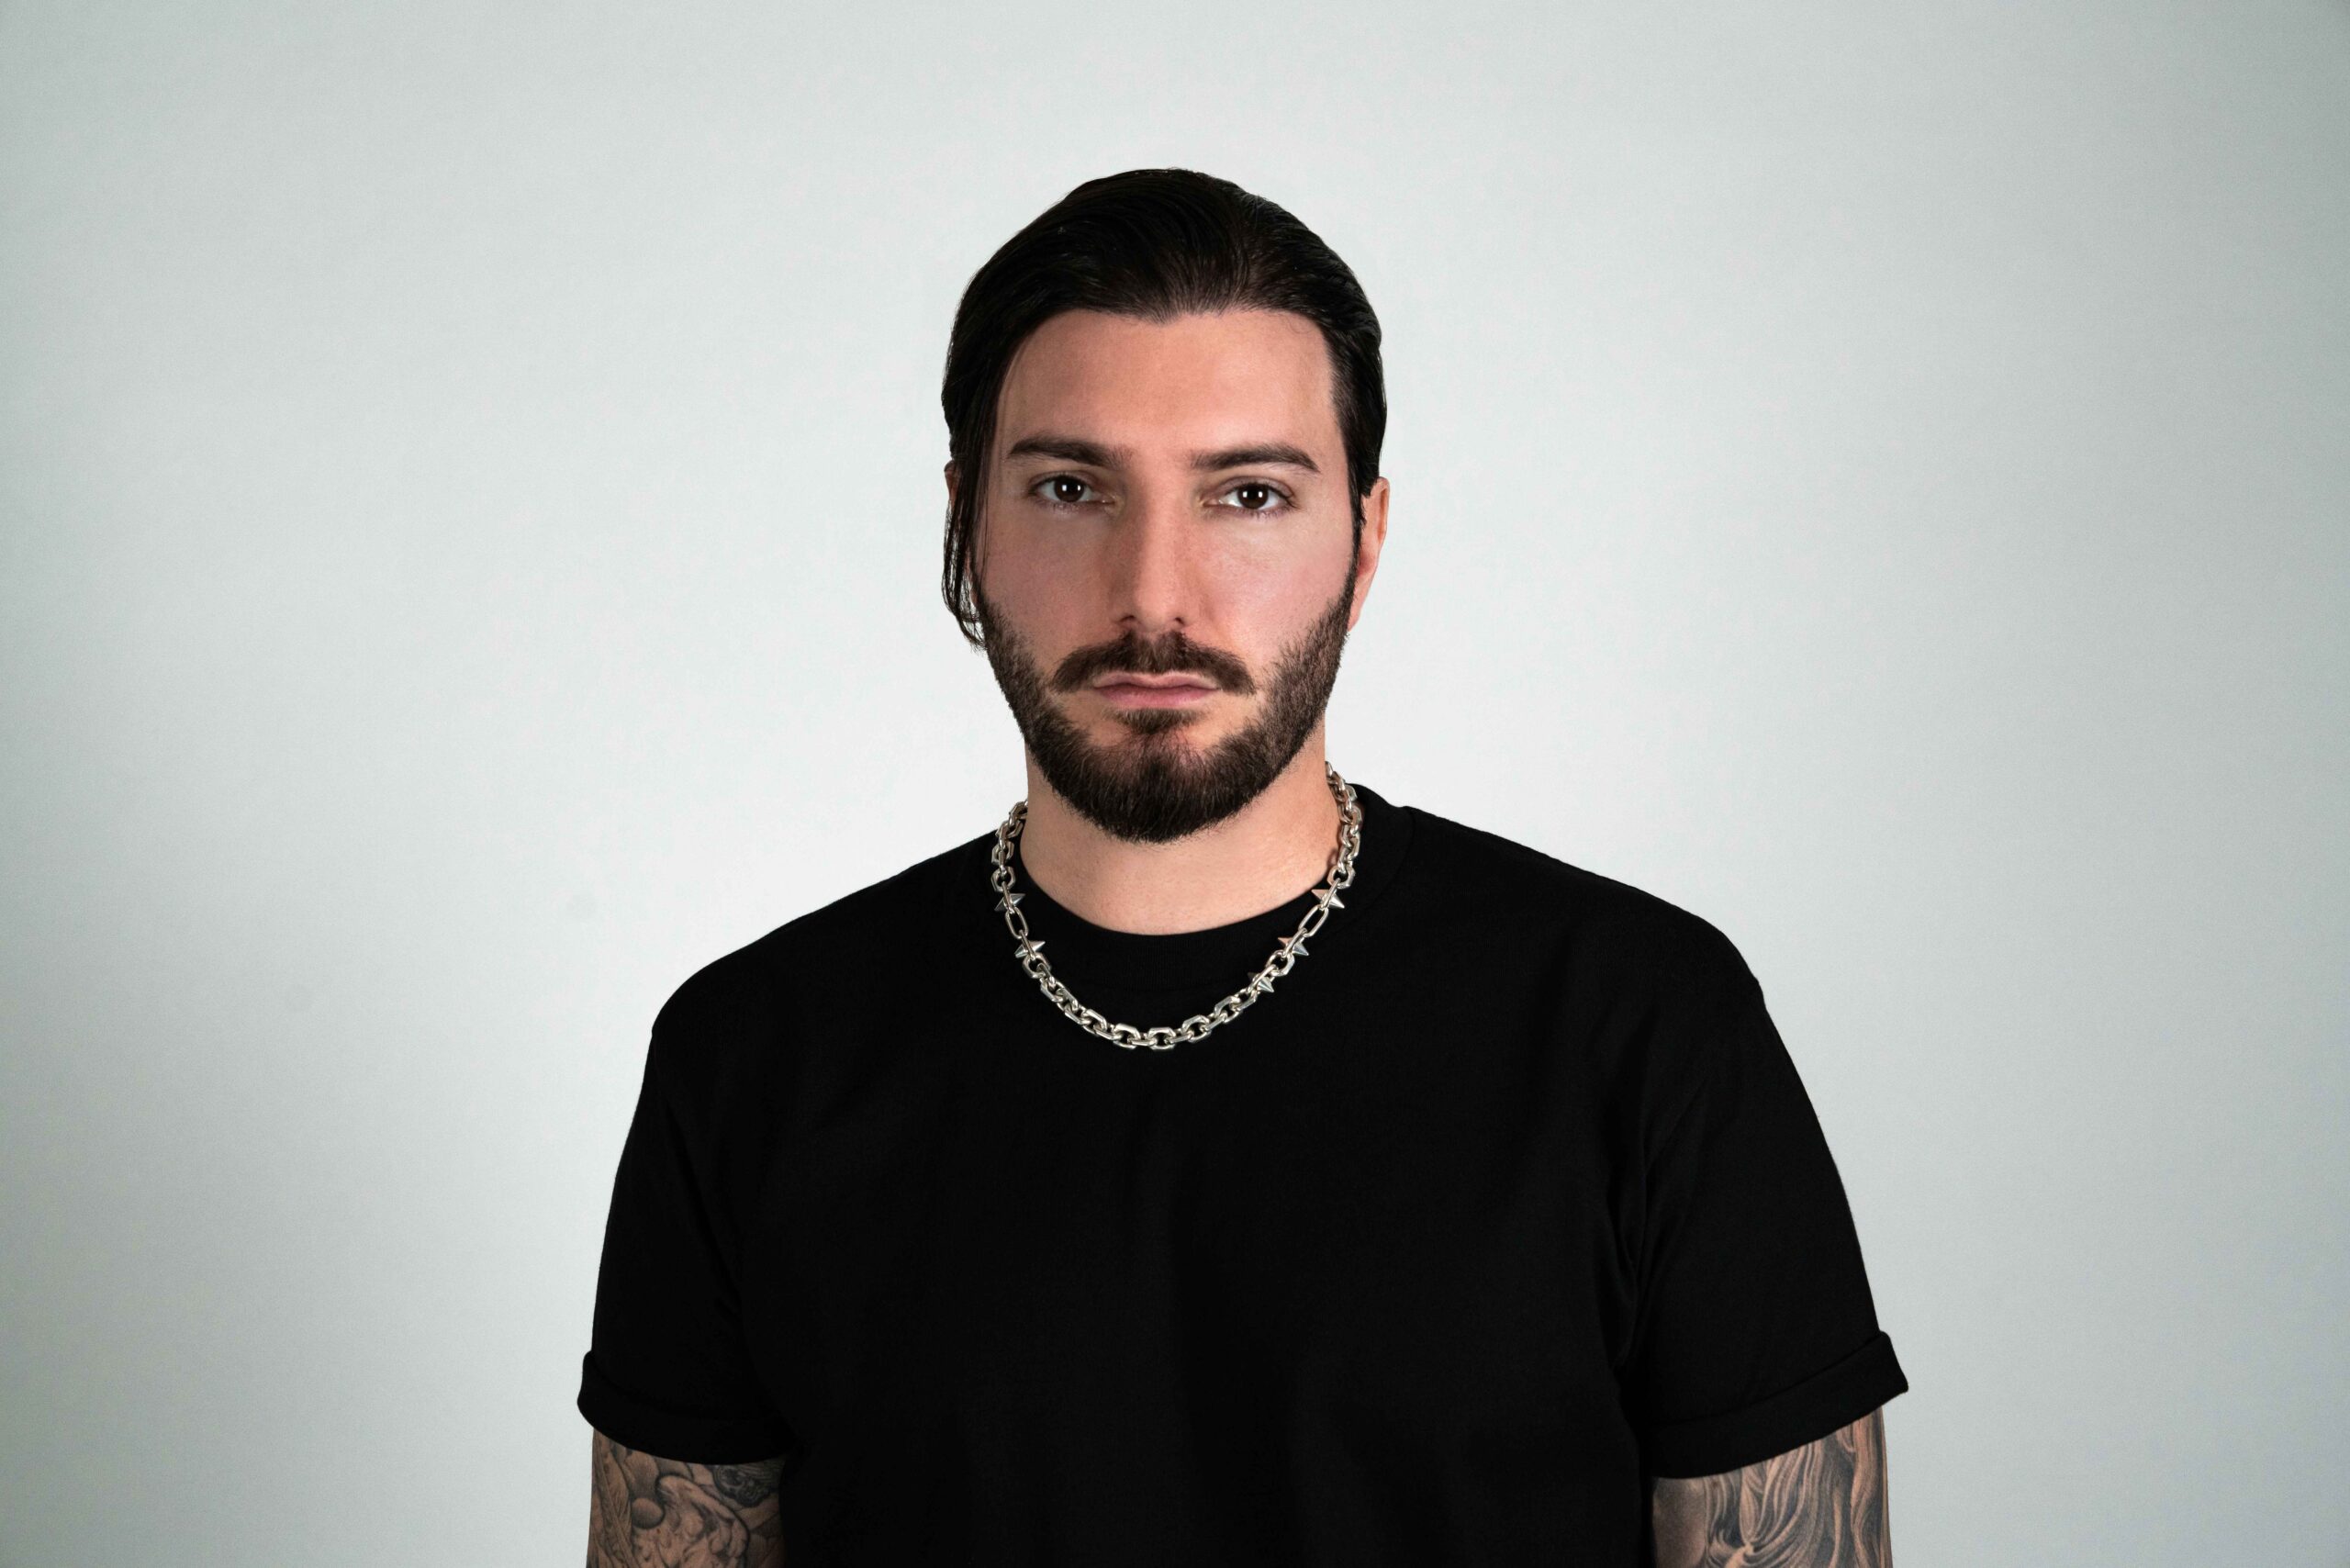 Alesso reveals Country music side with ‘A Bar Song (Tipsy) [Remix]’: Listen